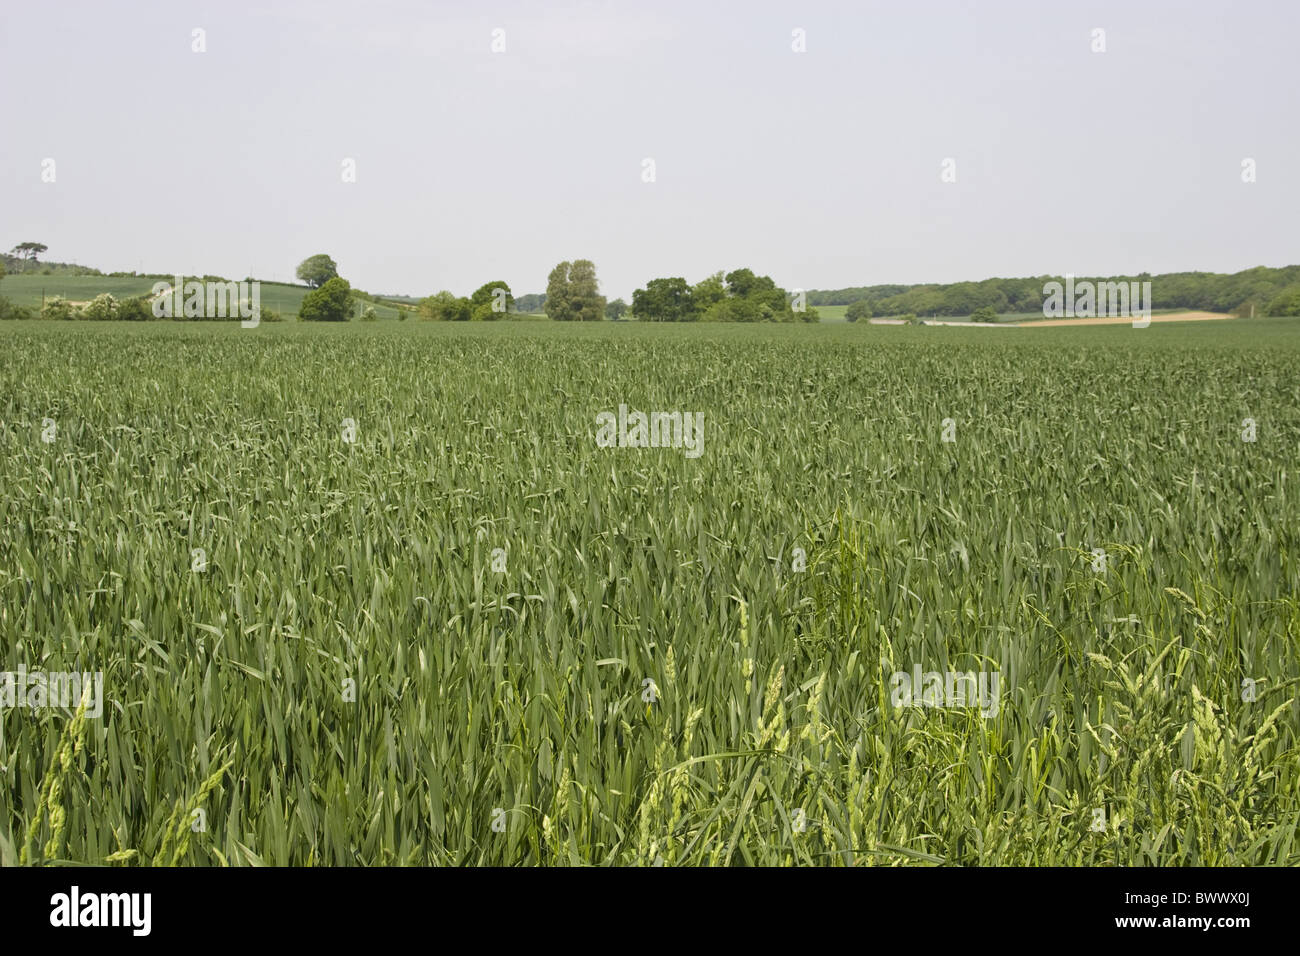 Agriculture Agricultural Agricultures Aestivum Cereals Cereal Landcrop Landcrops Crop Cropping Crops Cultivate Cultivates Stock Photo